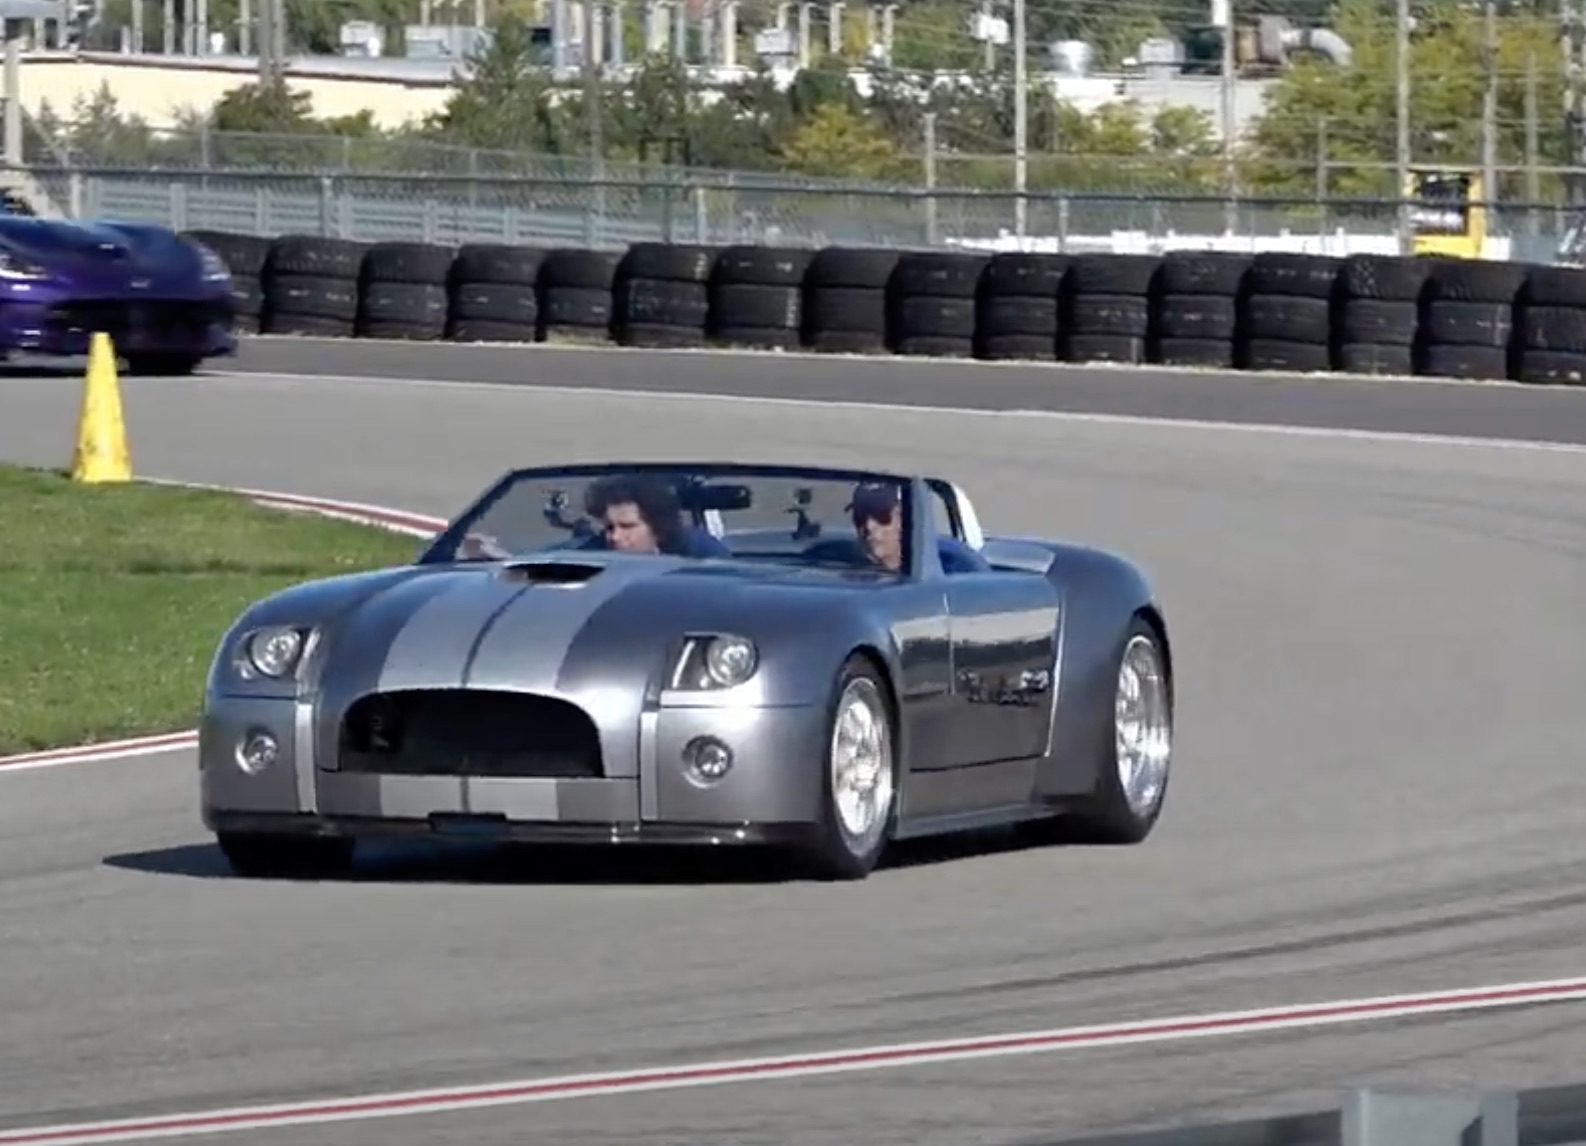 Morning Symphony: The 2004 Shelby Cobra Concept At M1 Concourse